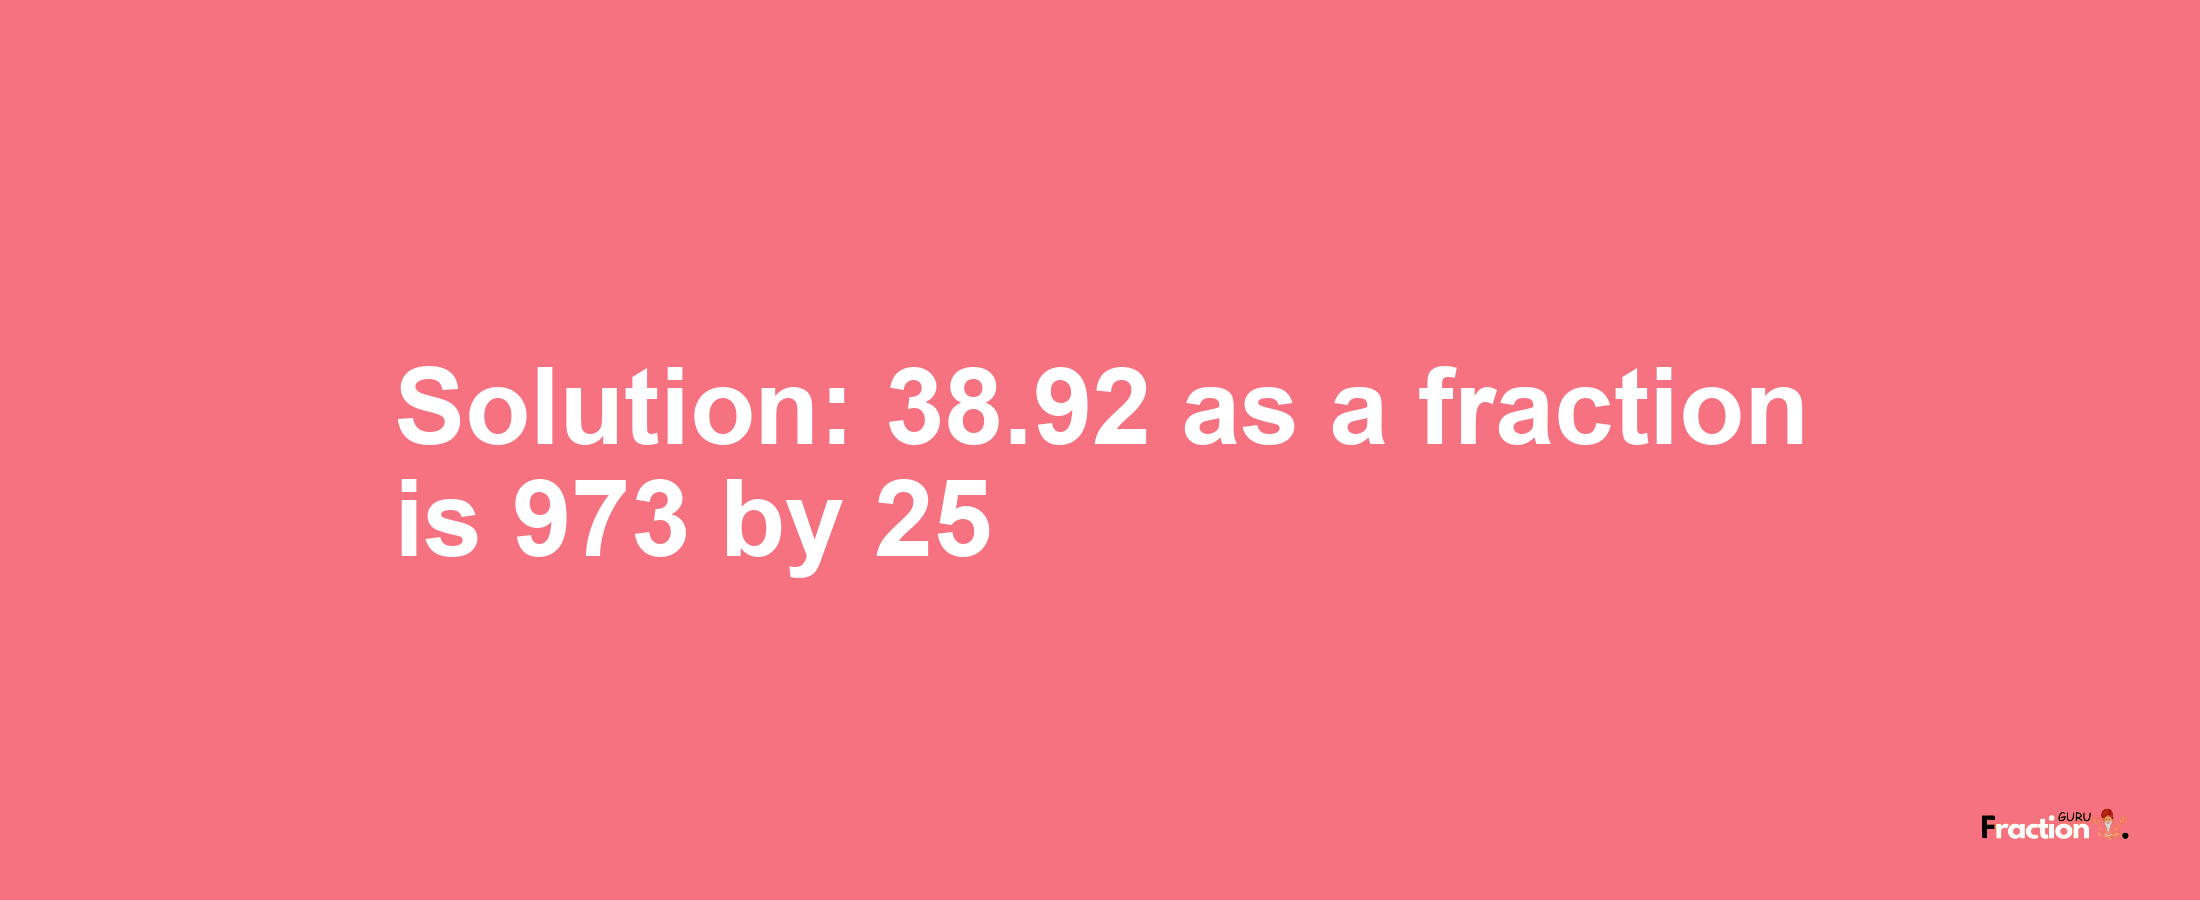 Solution:38.92 as a fraction is 973/25